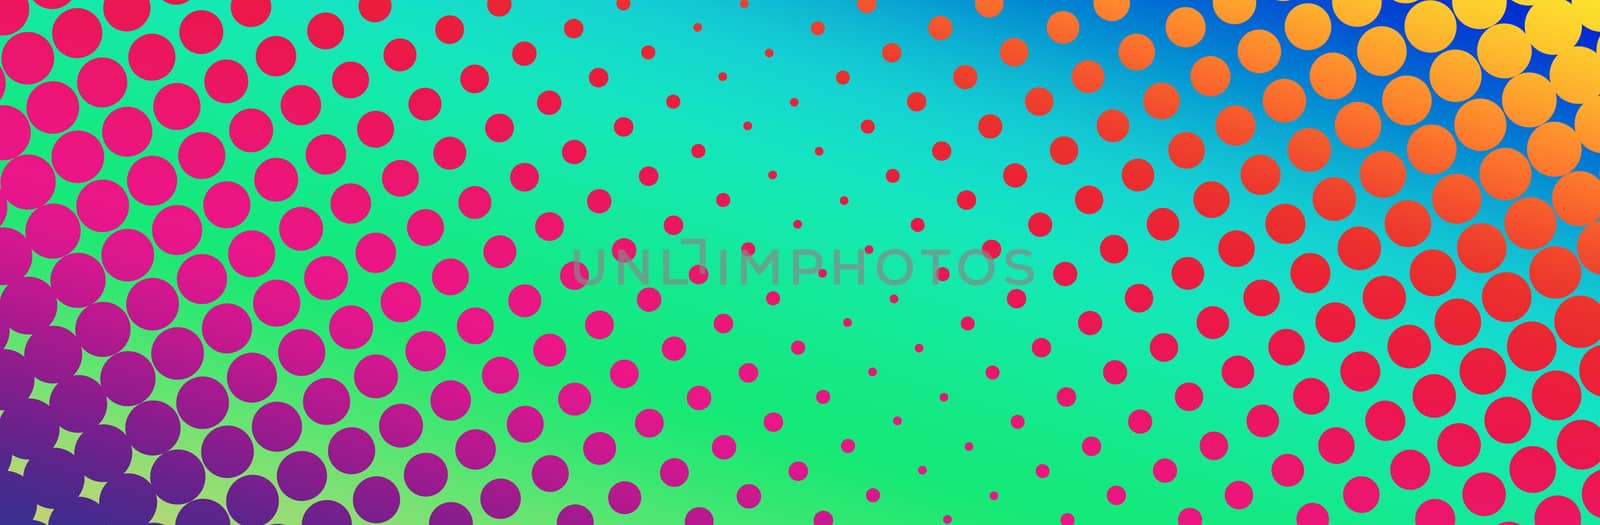 Futuristic abstract background for design. Spectrum color circles with a gradient fill.